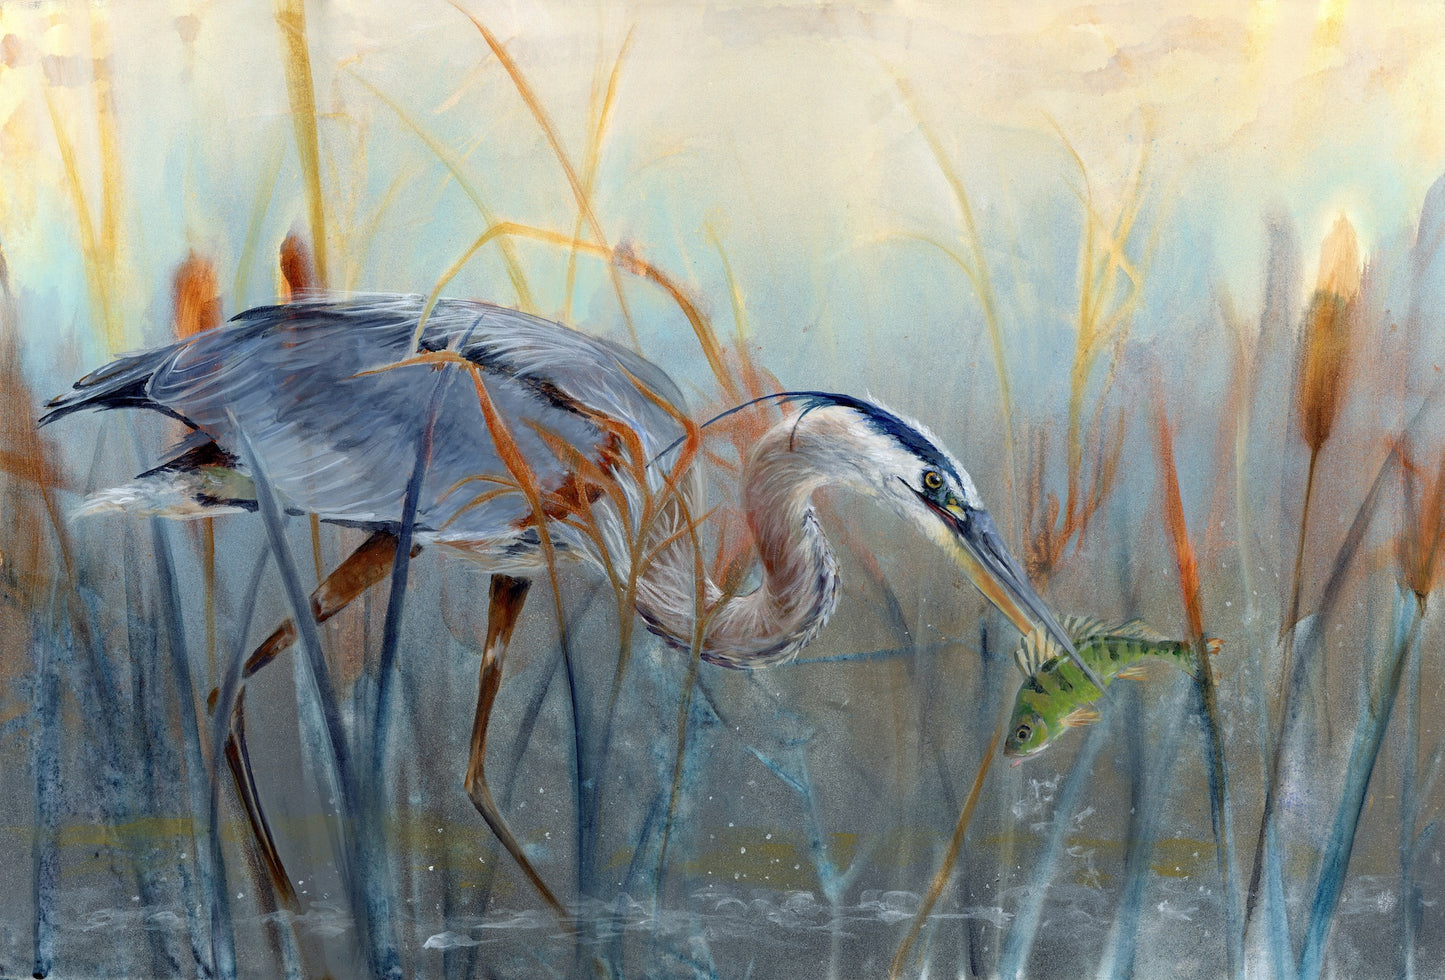 Print Reproduction of "Heron and Perch"